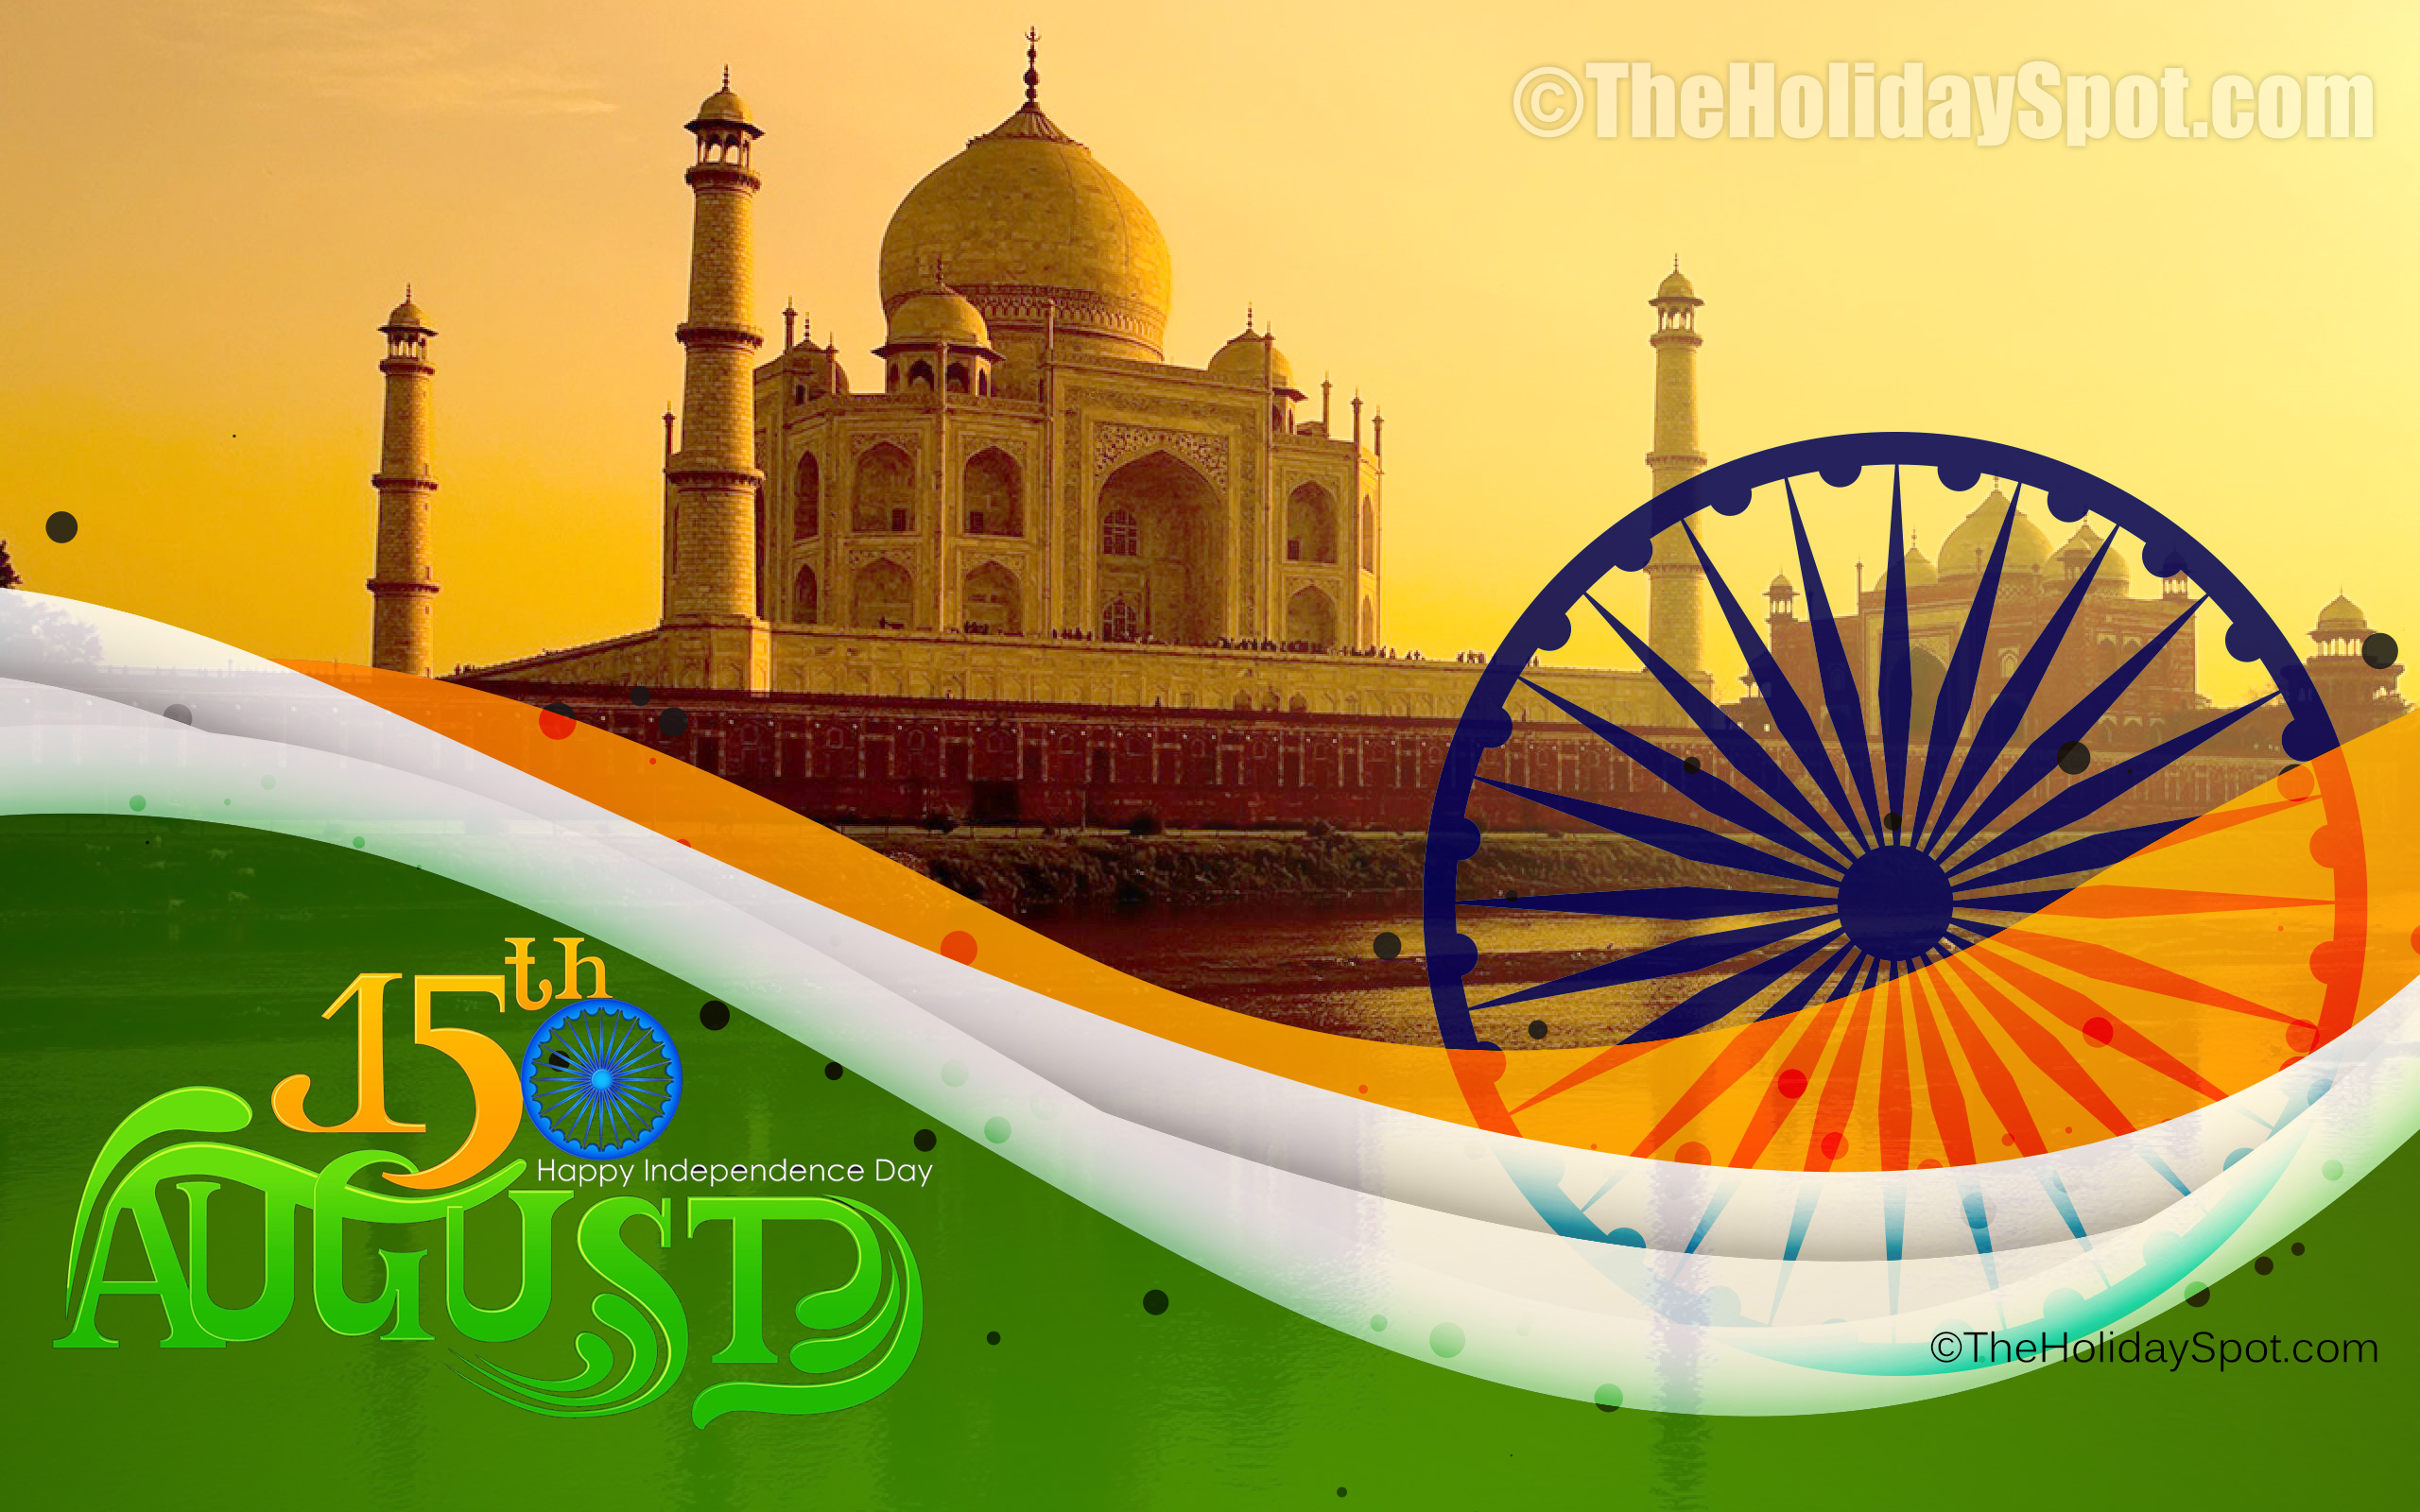 Indian Independence Day HD Image 2020 August Independence Day Free Wallpaper